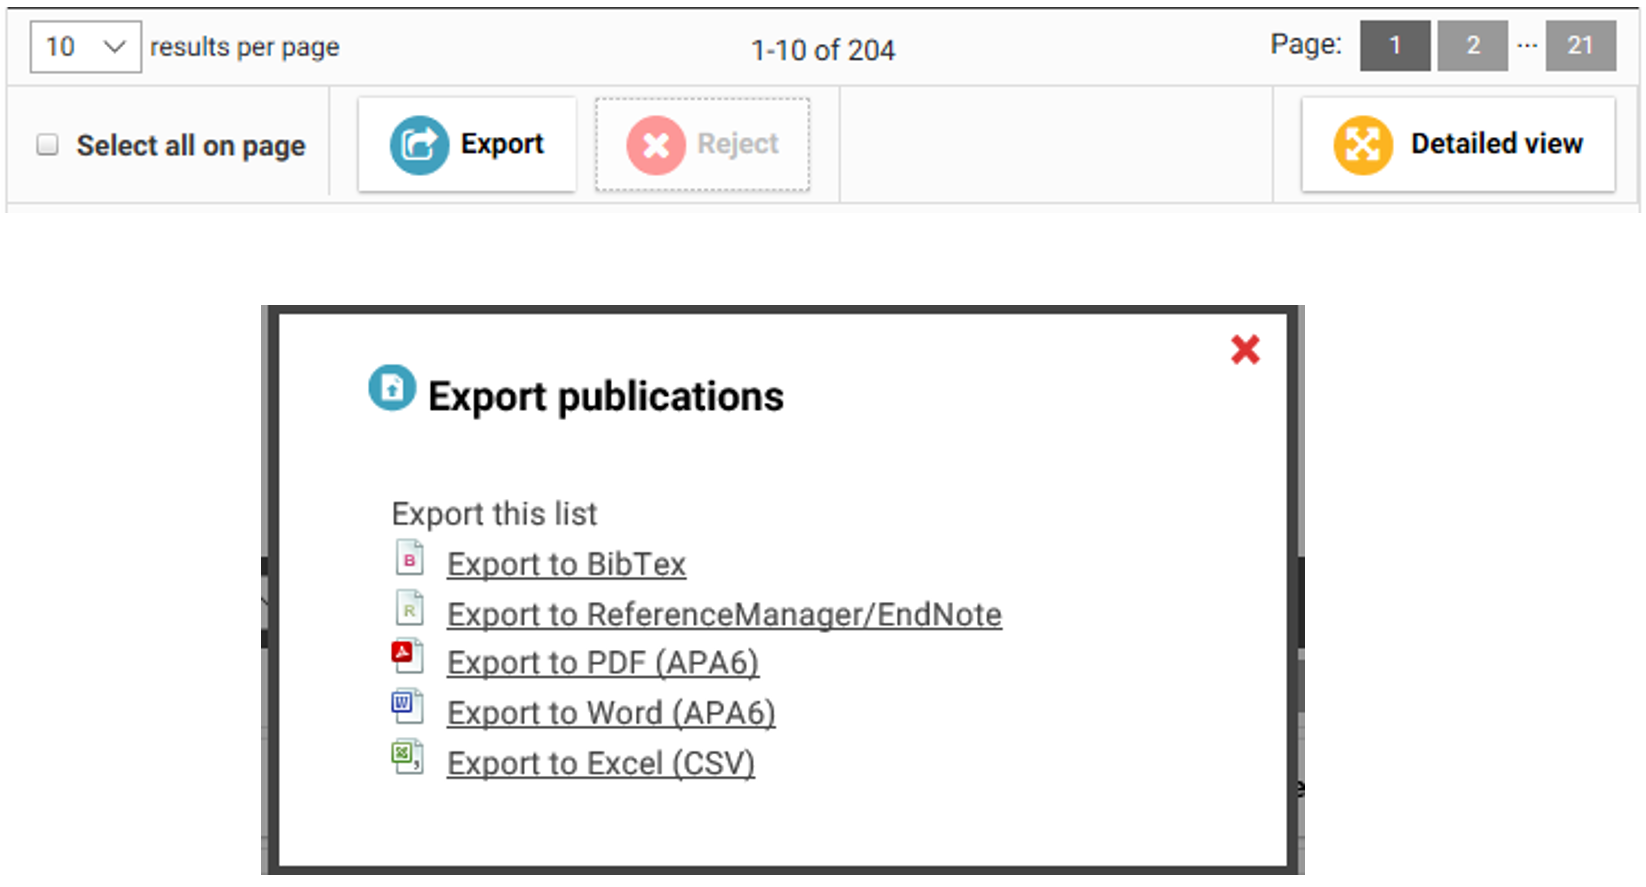 Screen capture of Elements user page showing Export Publications list options.